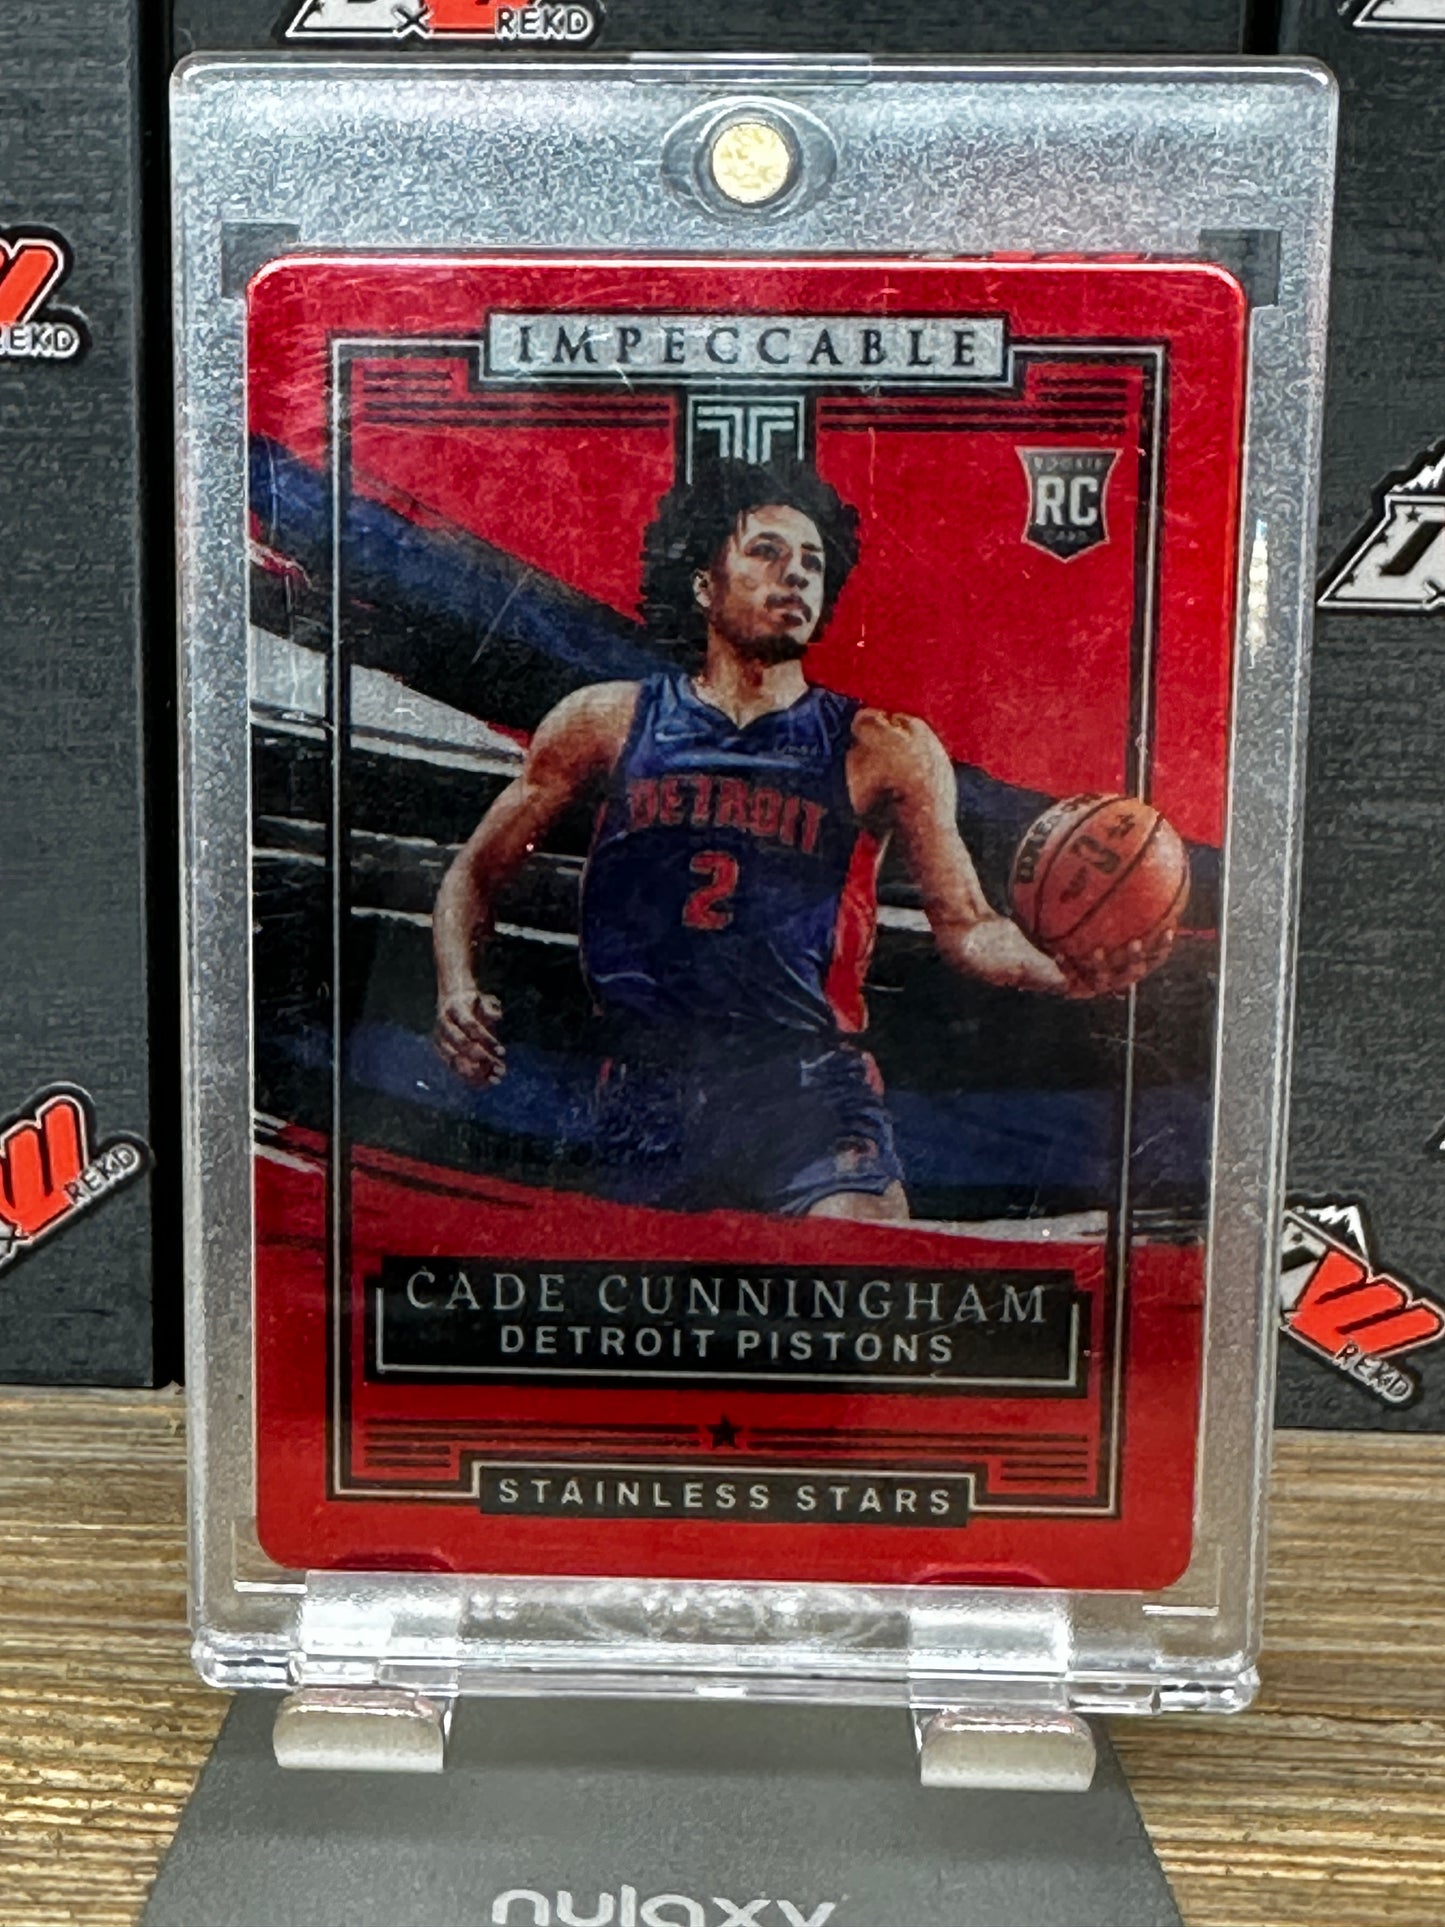 2021-22 Panini Impeccable Stainless Stars Asia Red Cade Cunningham #20 Rookie RC